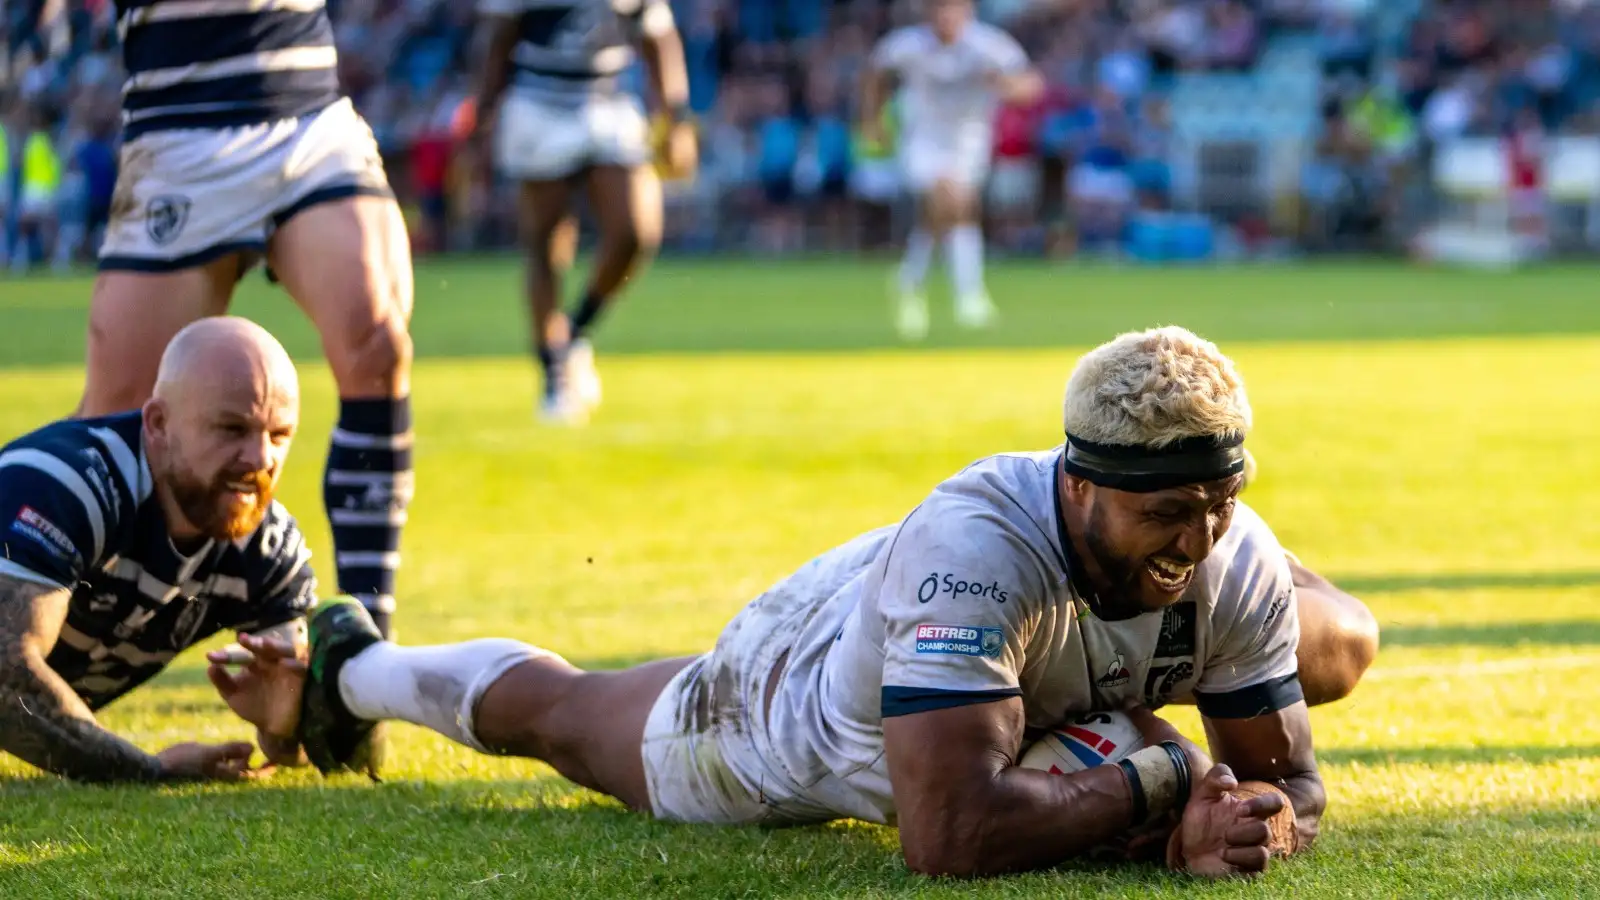 Wake up call and injury concern for Featherstone as Toulouse end their perfect start to the season